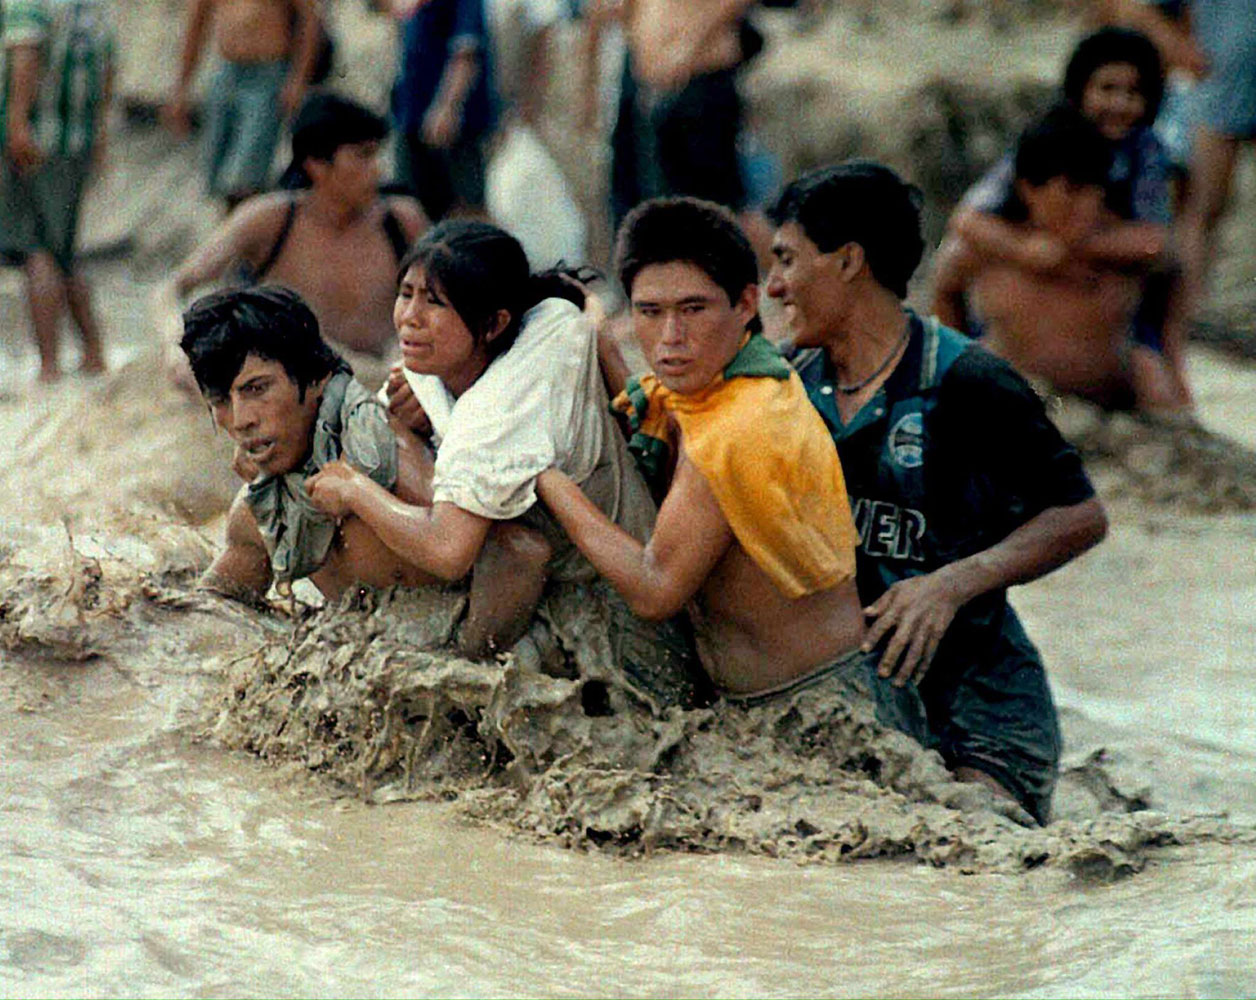 Three men help a woman trying to cross the overflowing Nepena River in Chimbote, Peru on Feb. 26, 1998. The meteorological phenomenon El Nino created ravaging weather conditions that killed many throughout Peru.